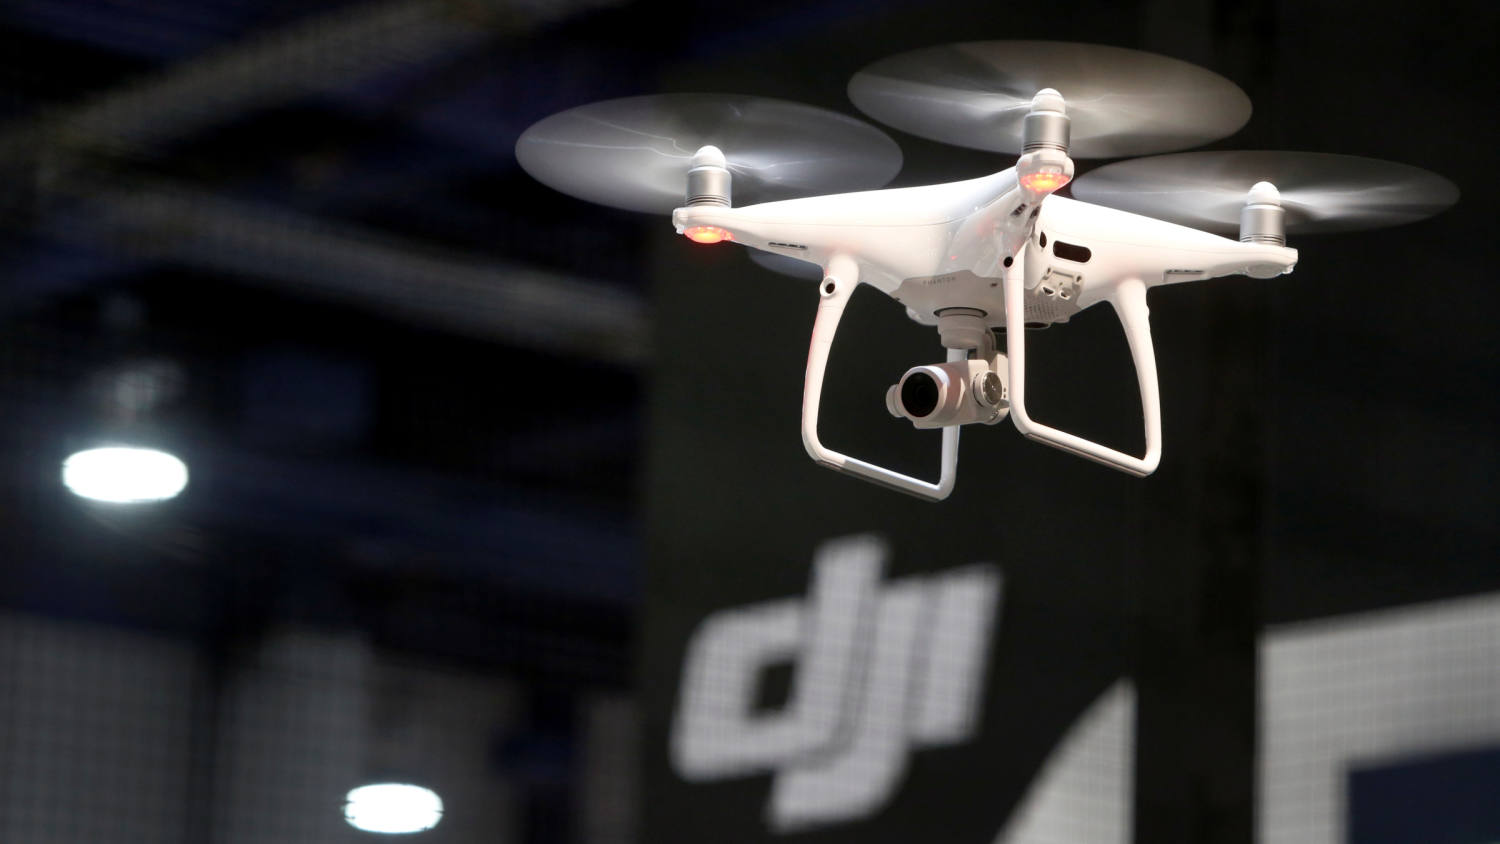 DJI's Affordable Driver Assistance Tech Set to Transform Automotive Industry